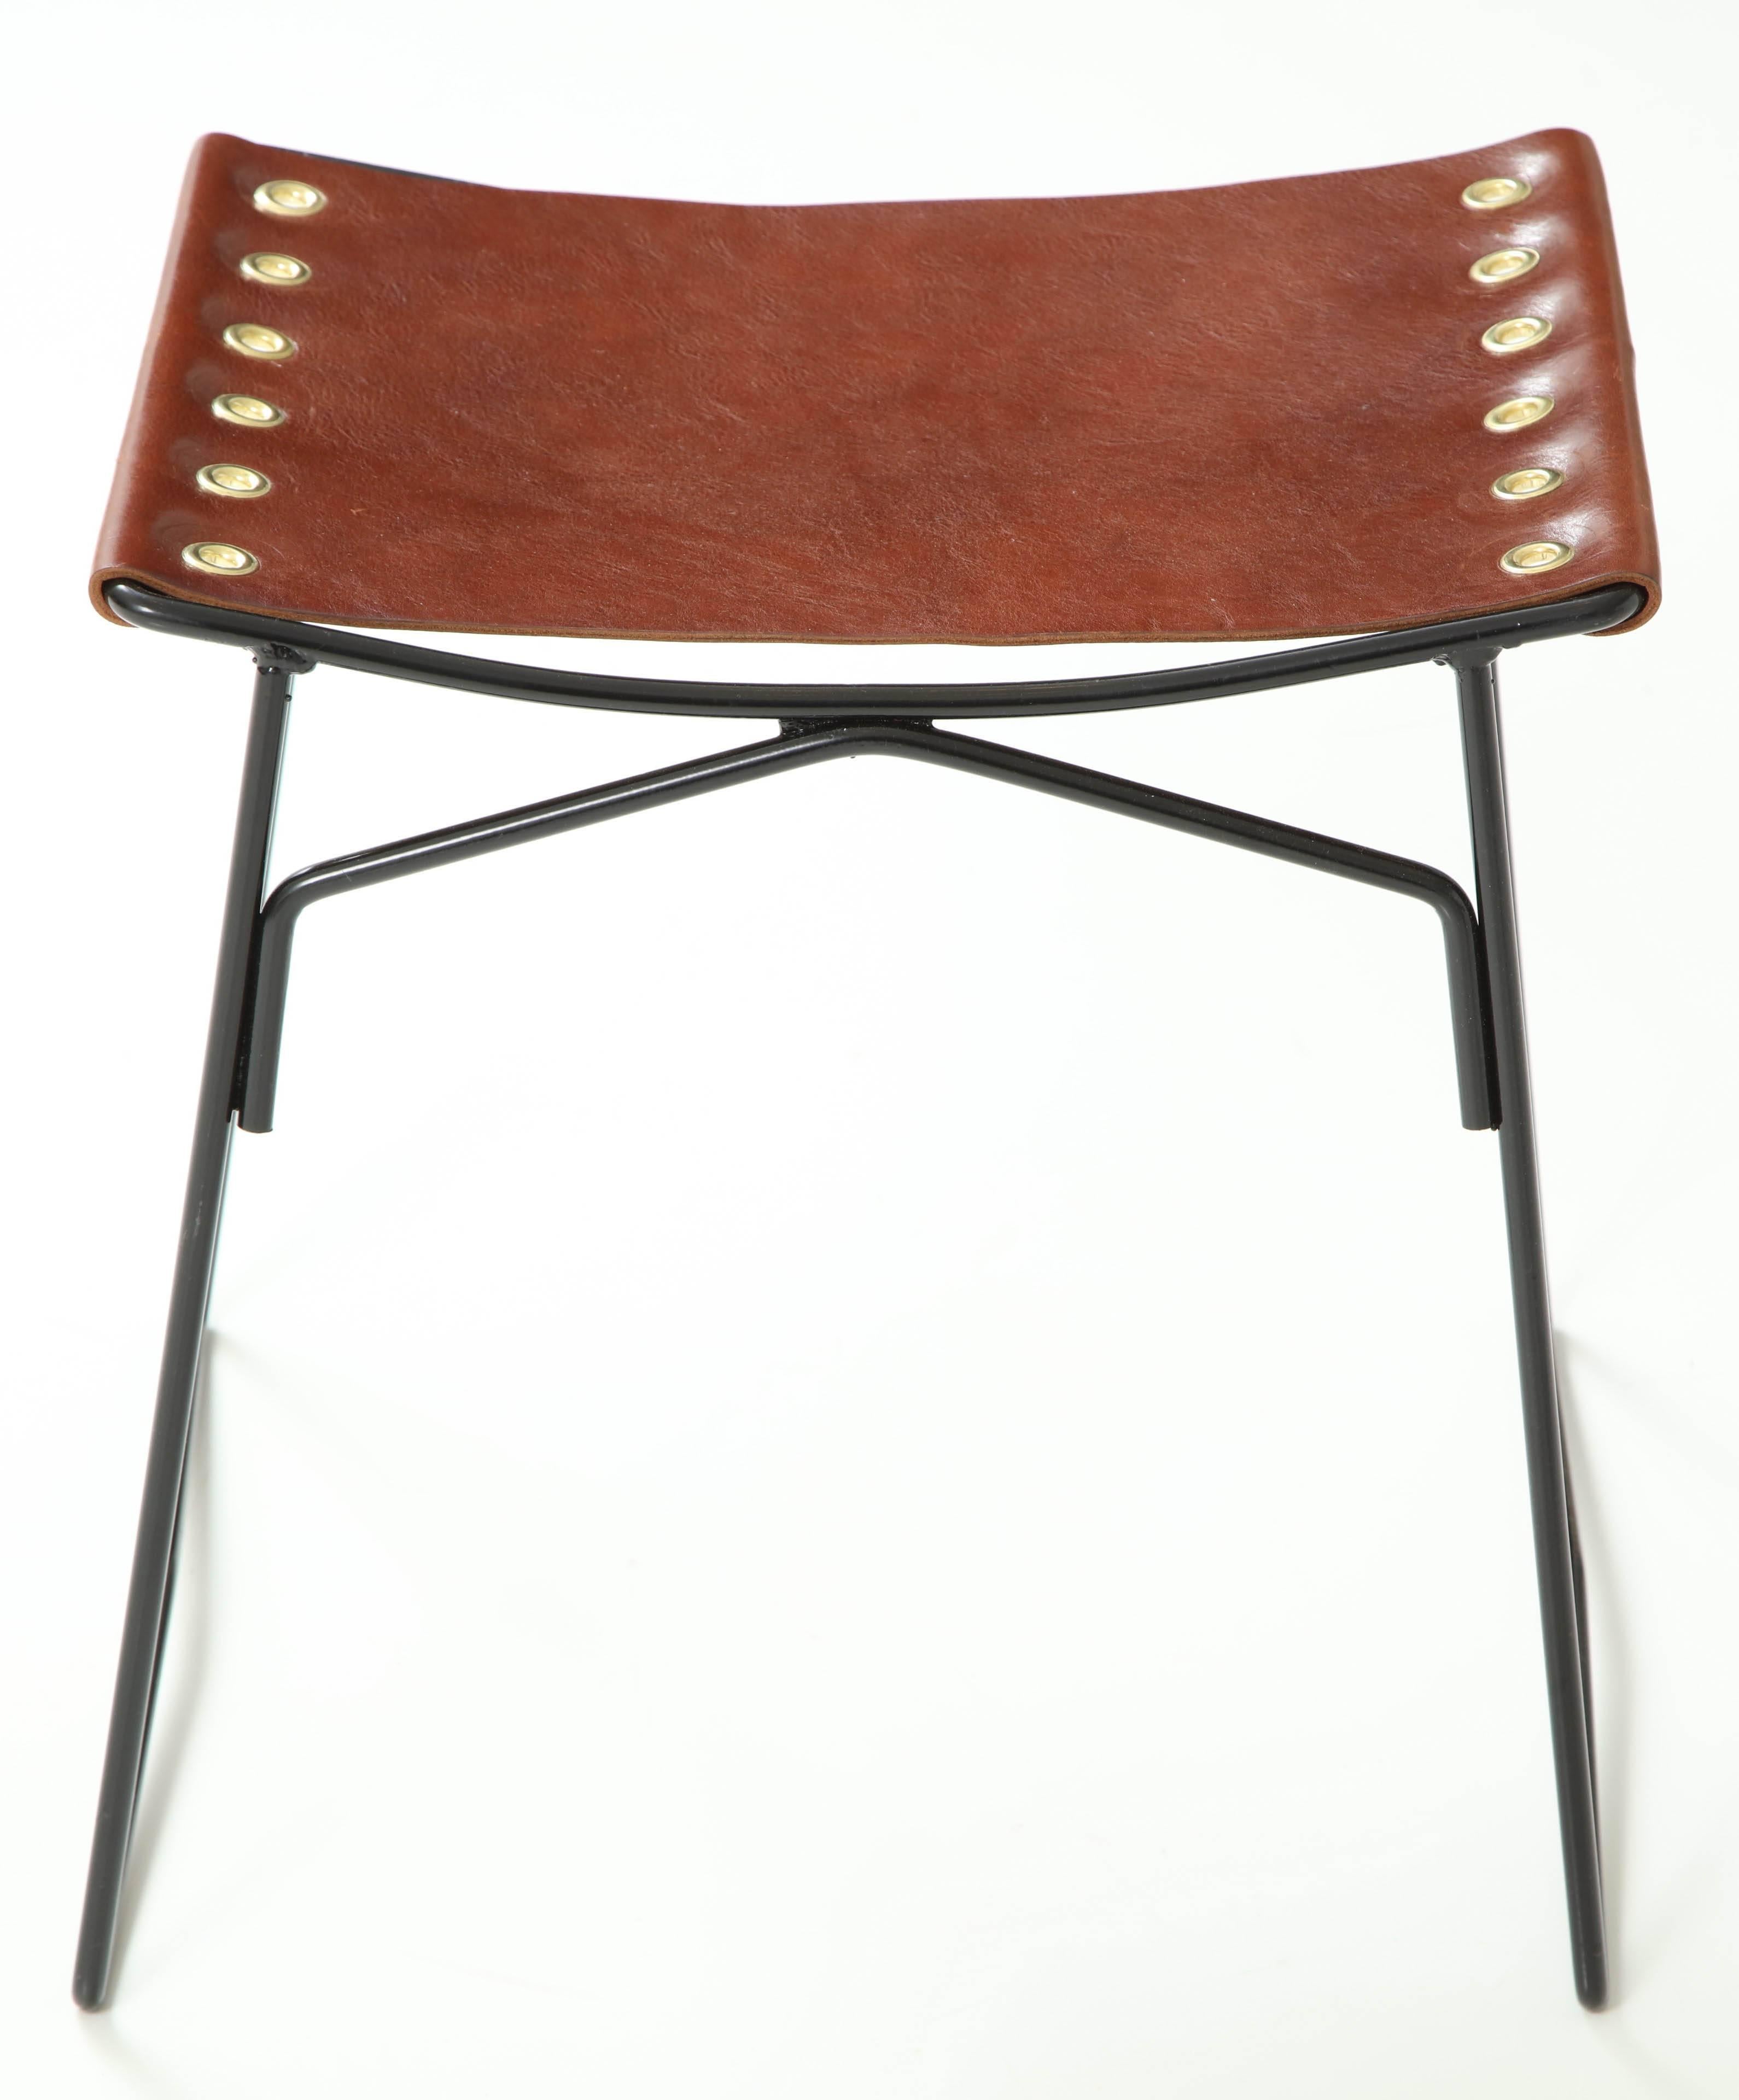 Pair of Leather Stools with Riveted Slings In Good Condition For Sale In Newburgh, NY